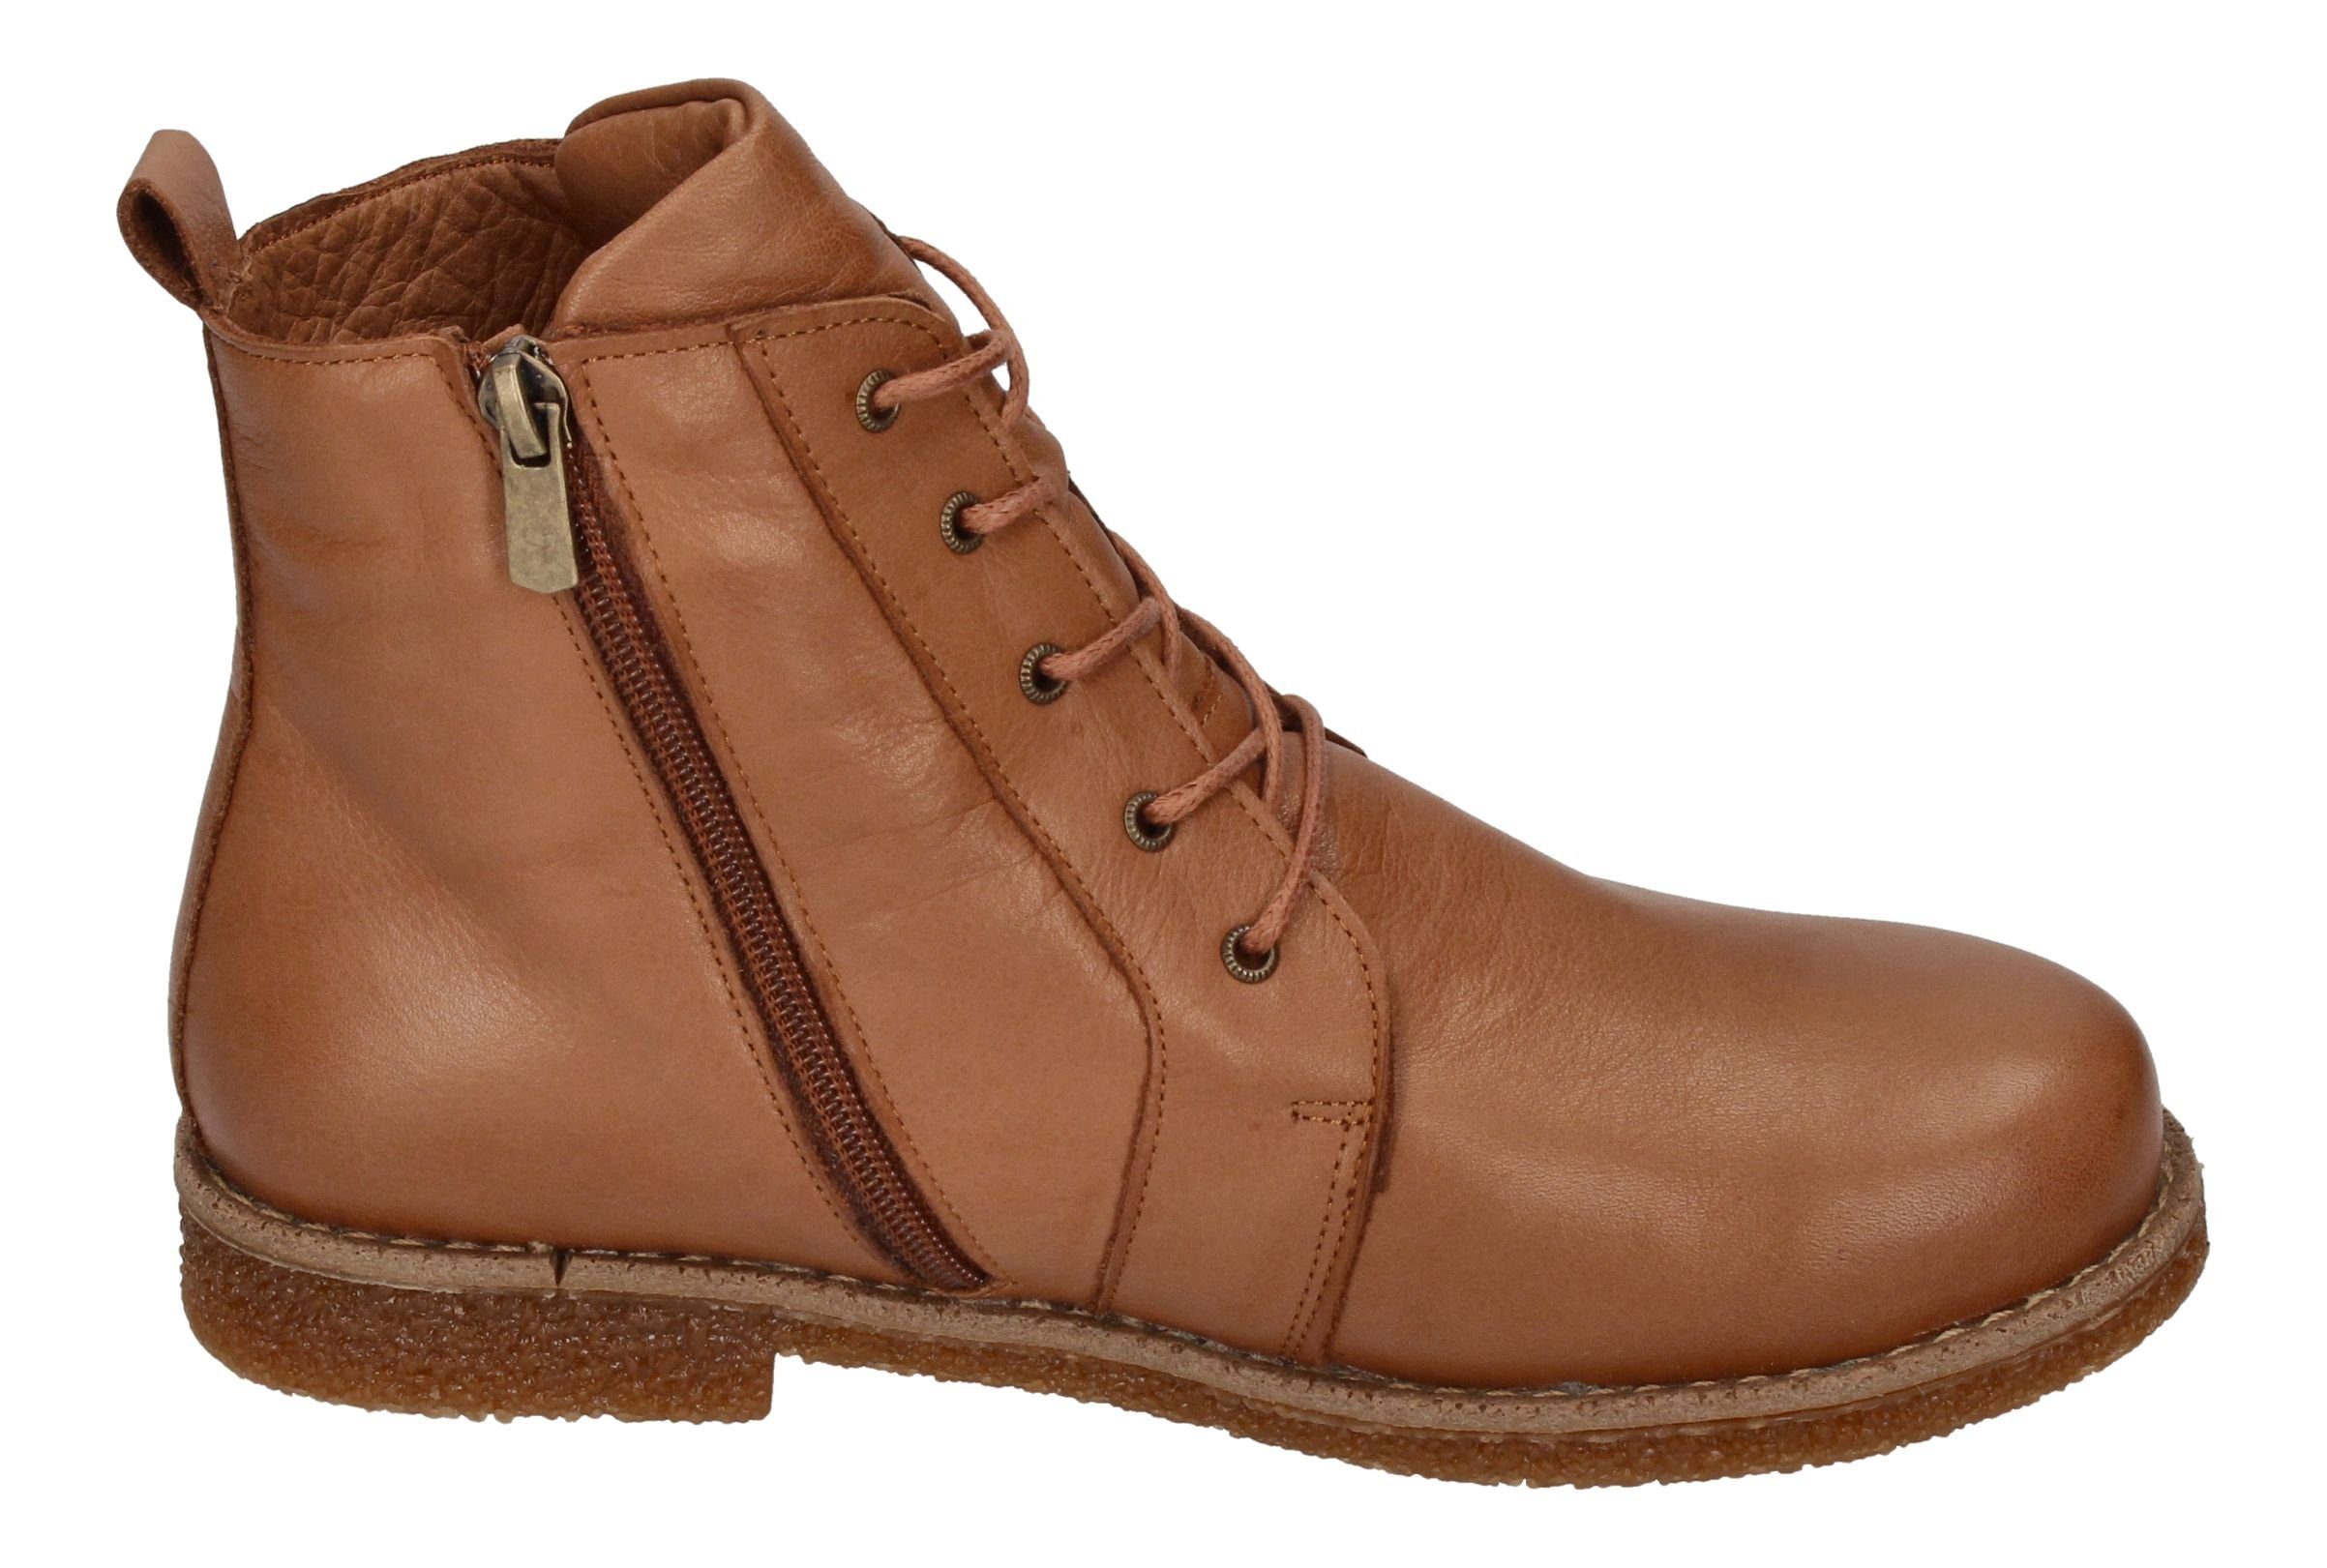 Chelseaboots Andrea Conti Braun 0348893-201